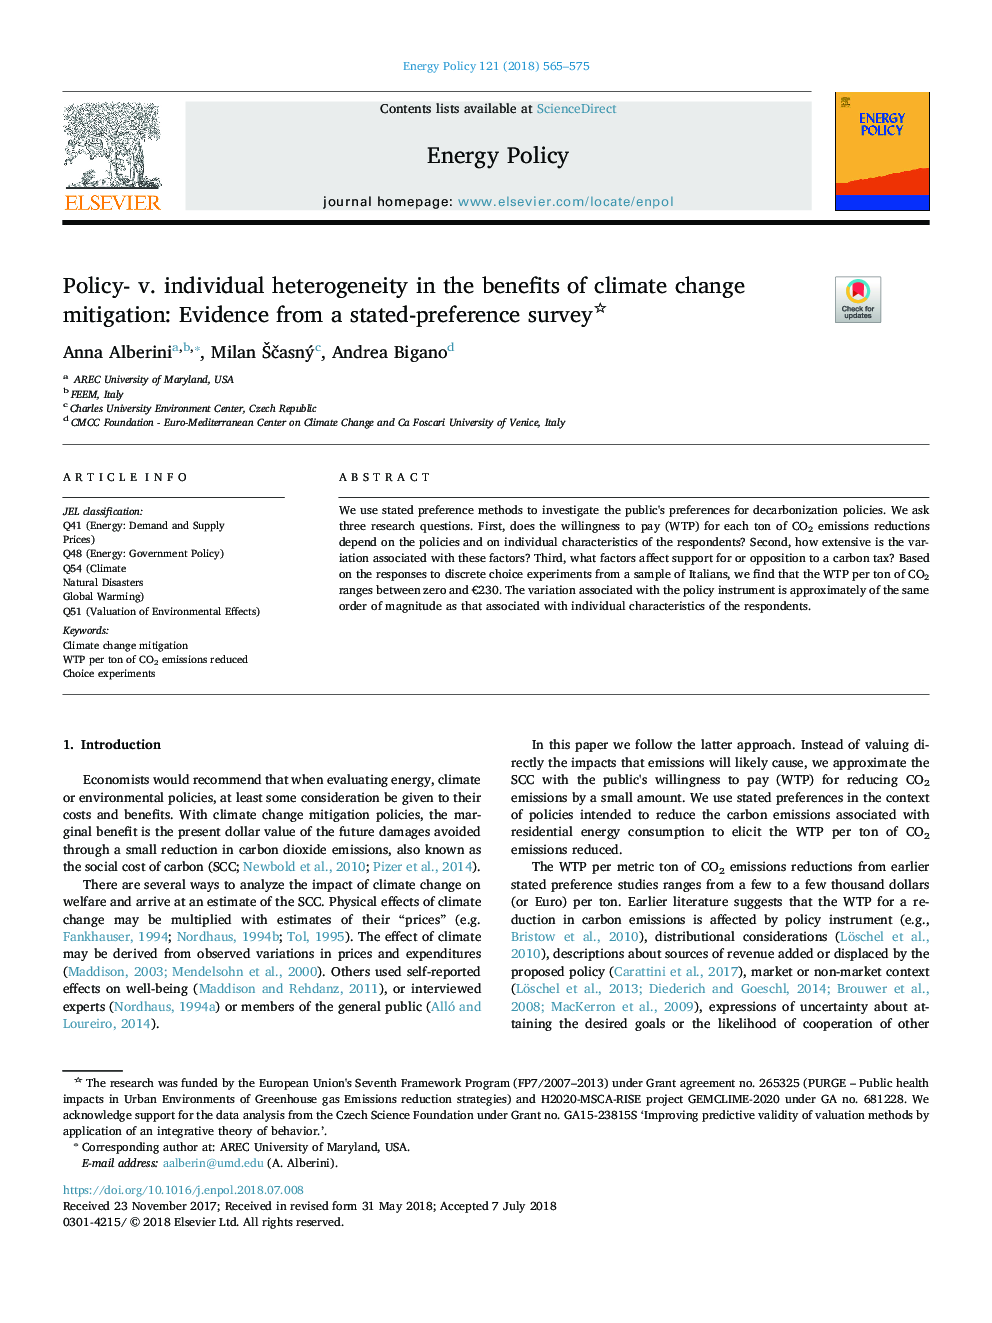 Policy- v. individual heterogeneity in the benefits of climate change mitigation: Evidence from a stated-preference survey